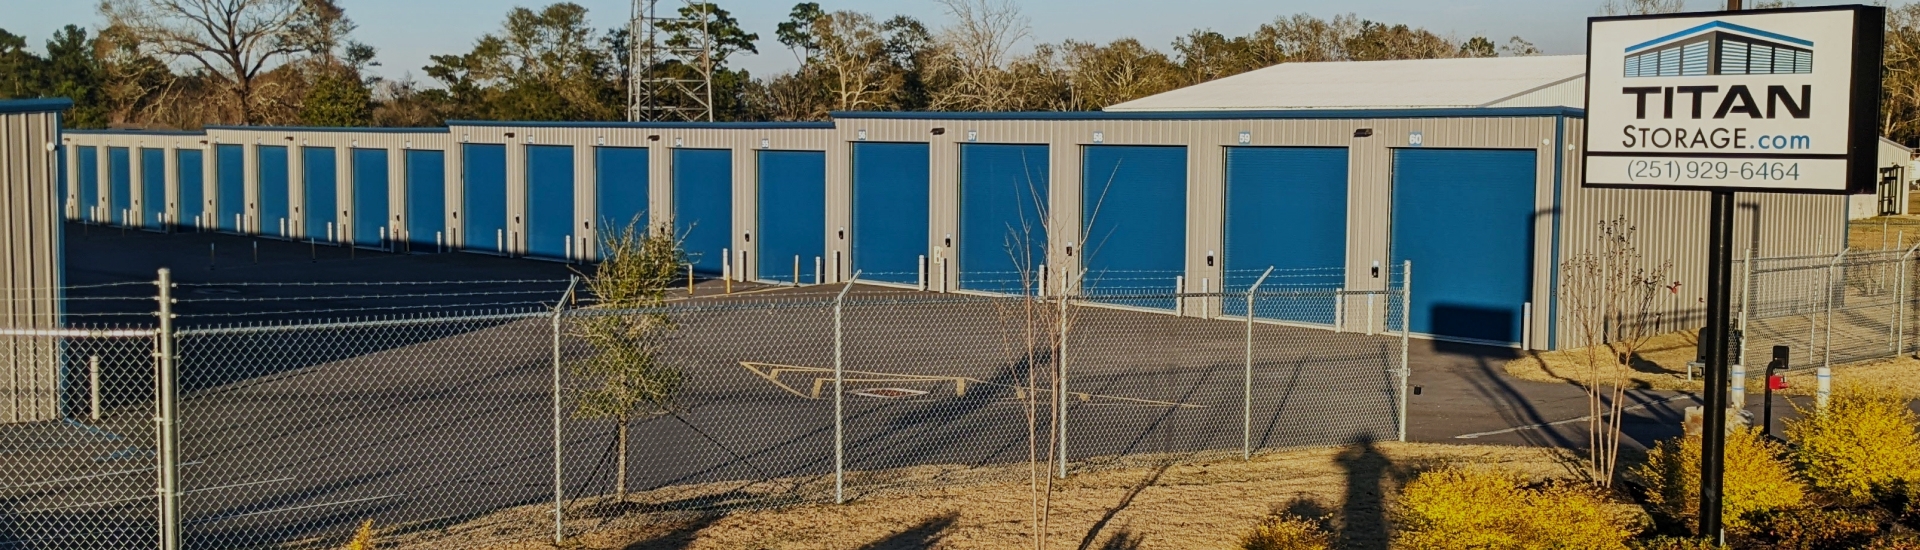 Enter Titan Storage Mobile through the wide gate and down the extra wide driveway to your unit.